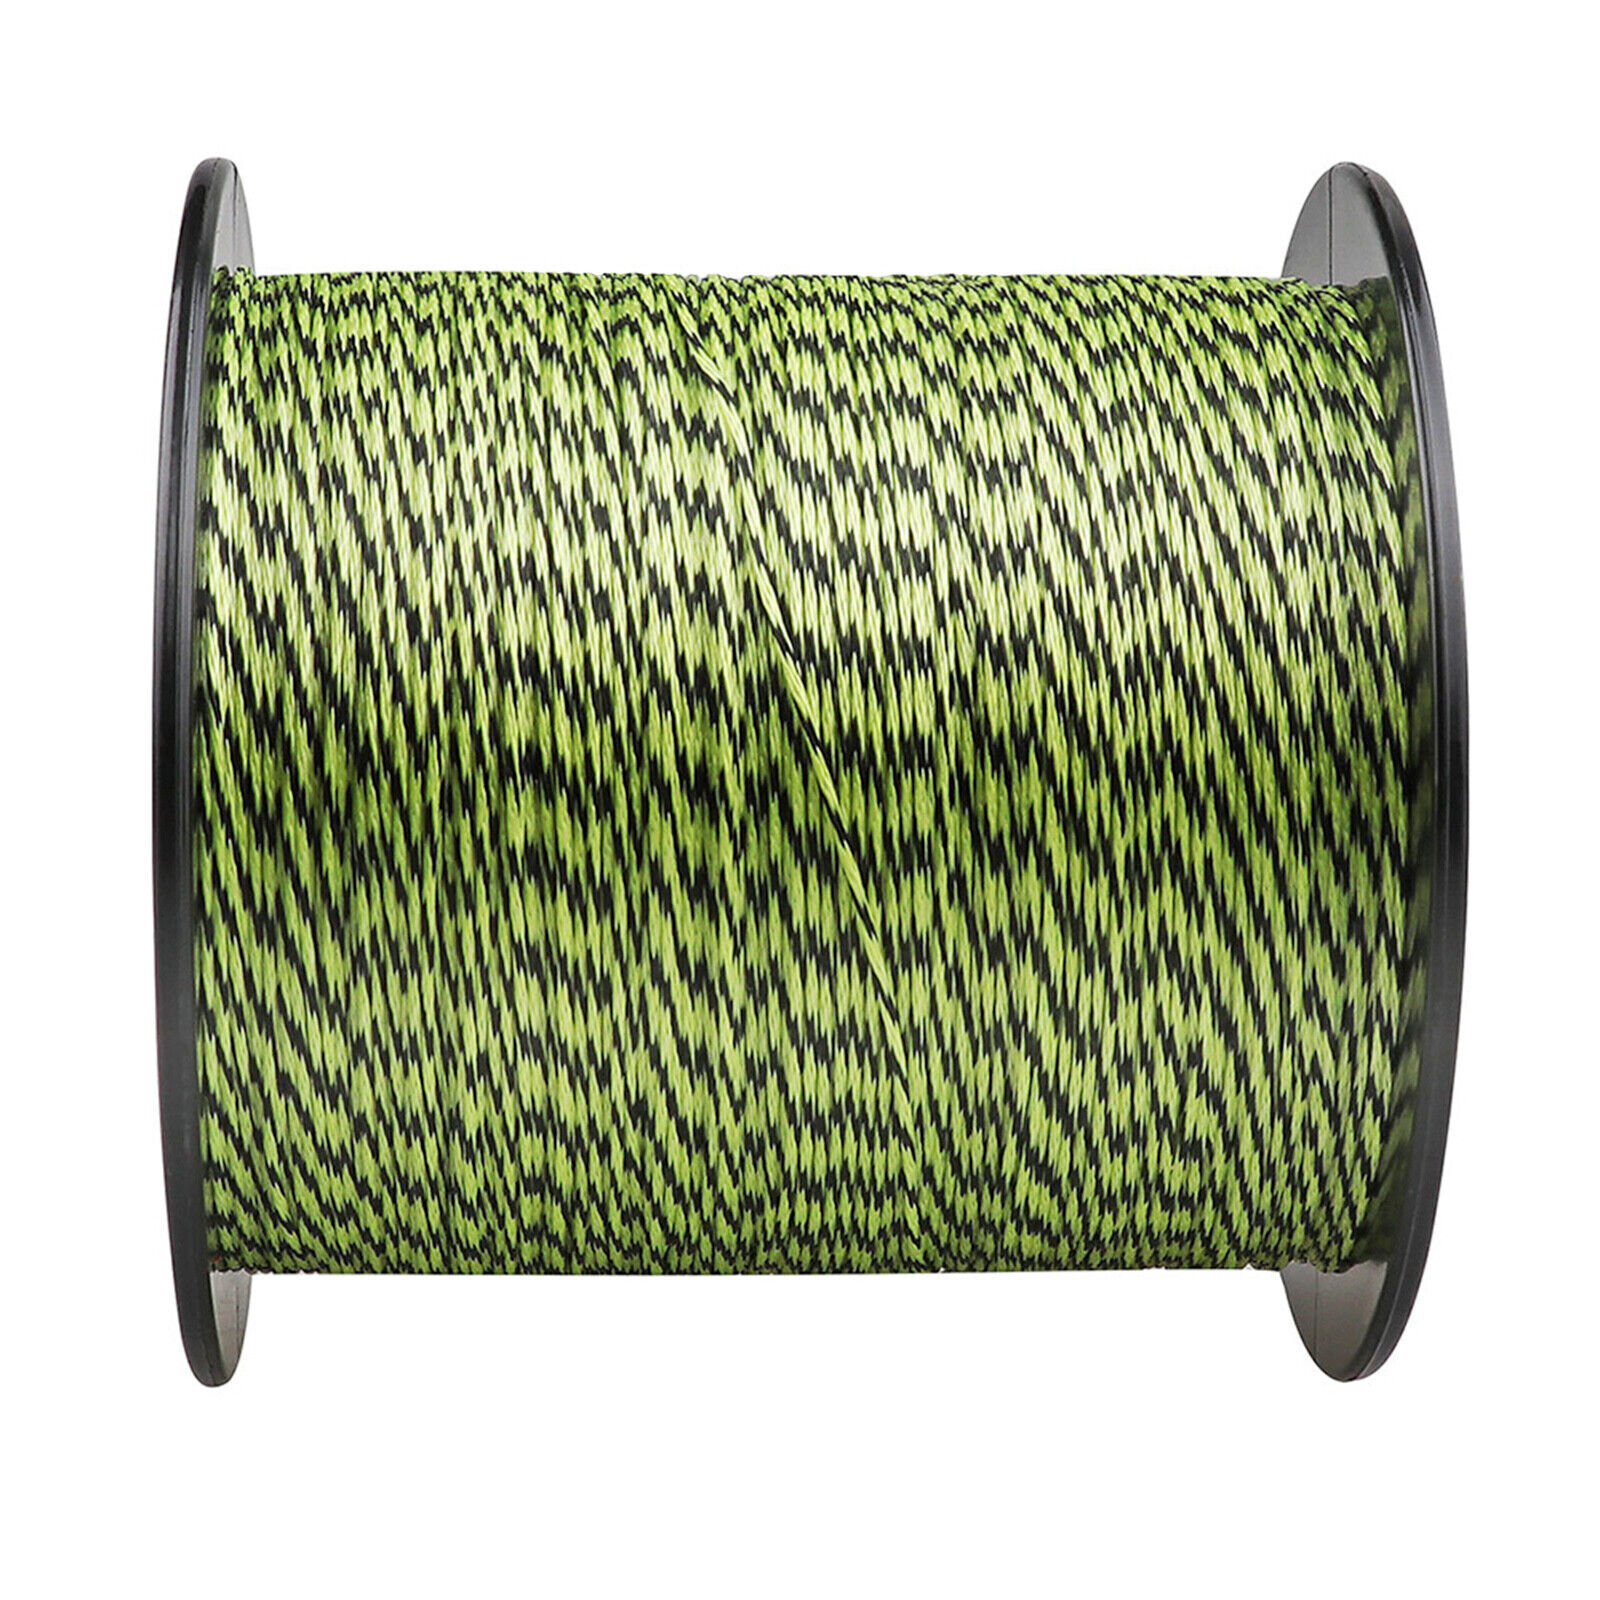 328 Yds Braided Fishing Line 4/8 Strands 12-100 lbs Abrasion